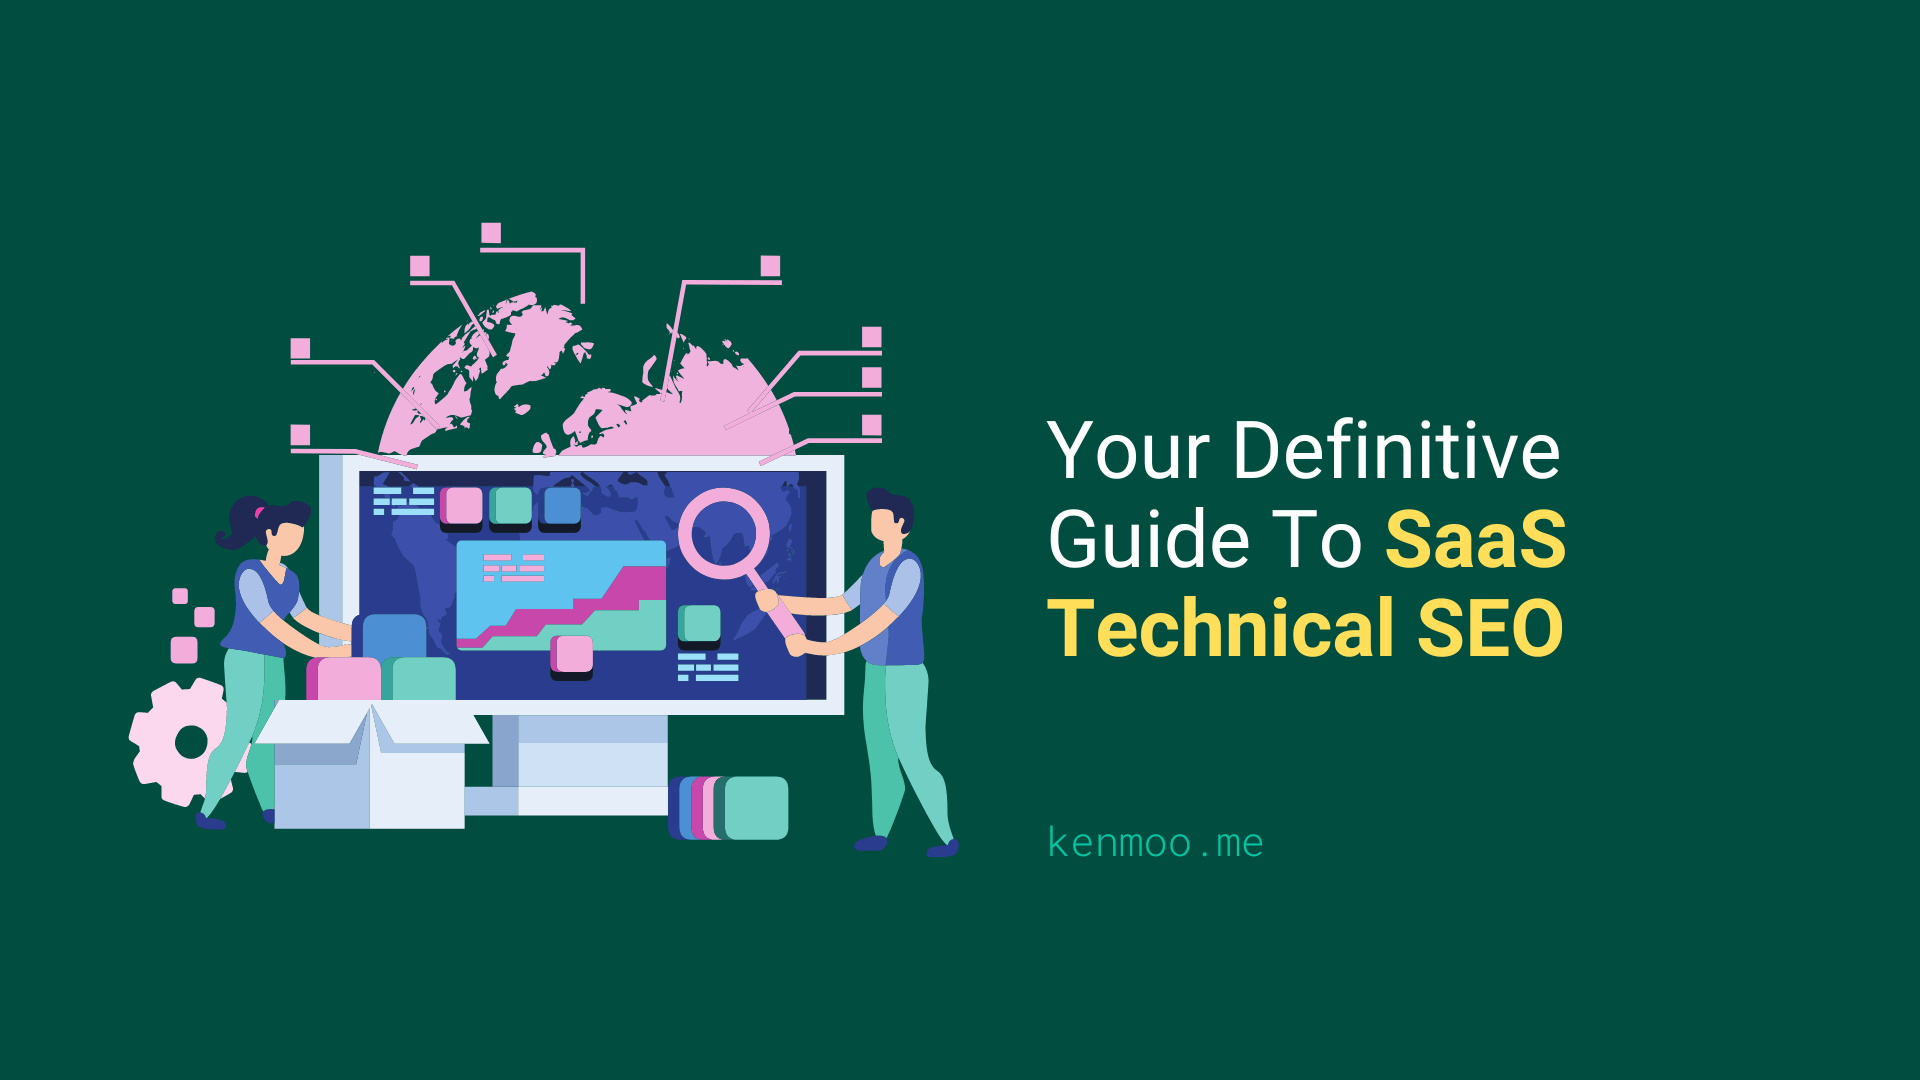 Your Definitive Guide To SaaS Technical SEO